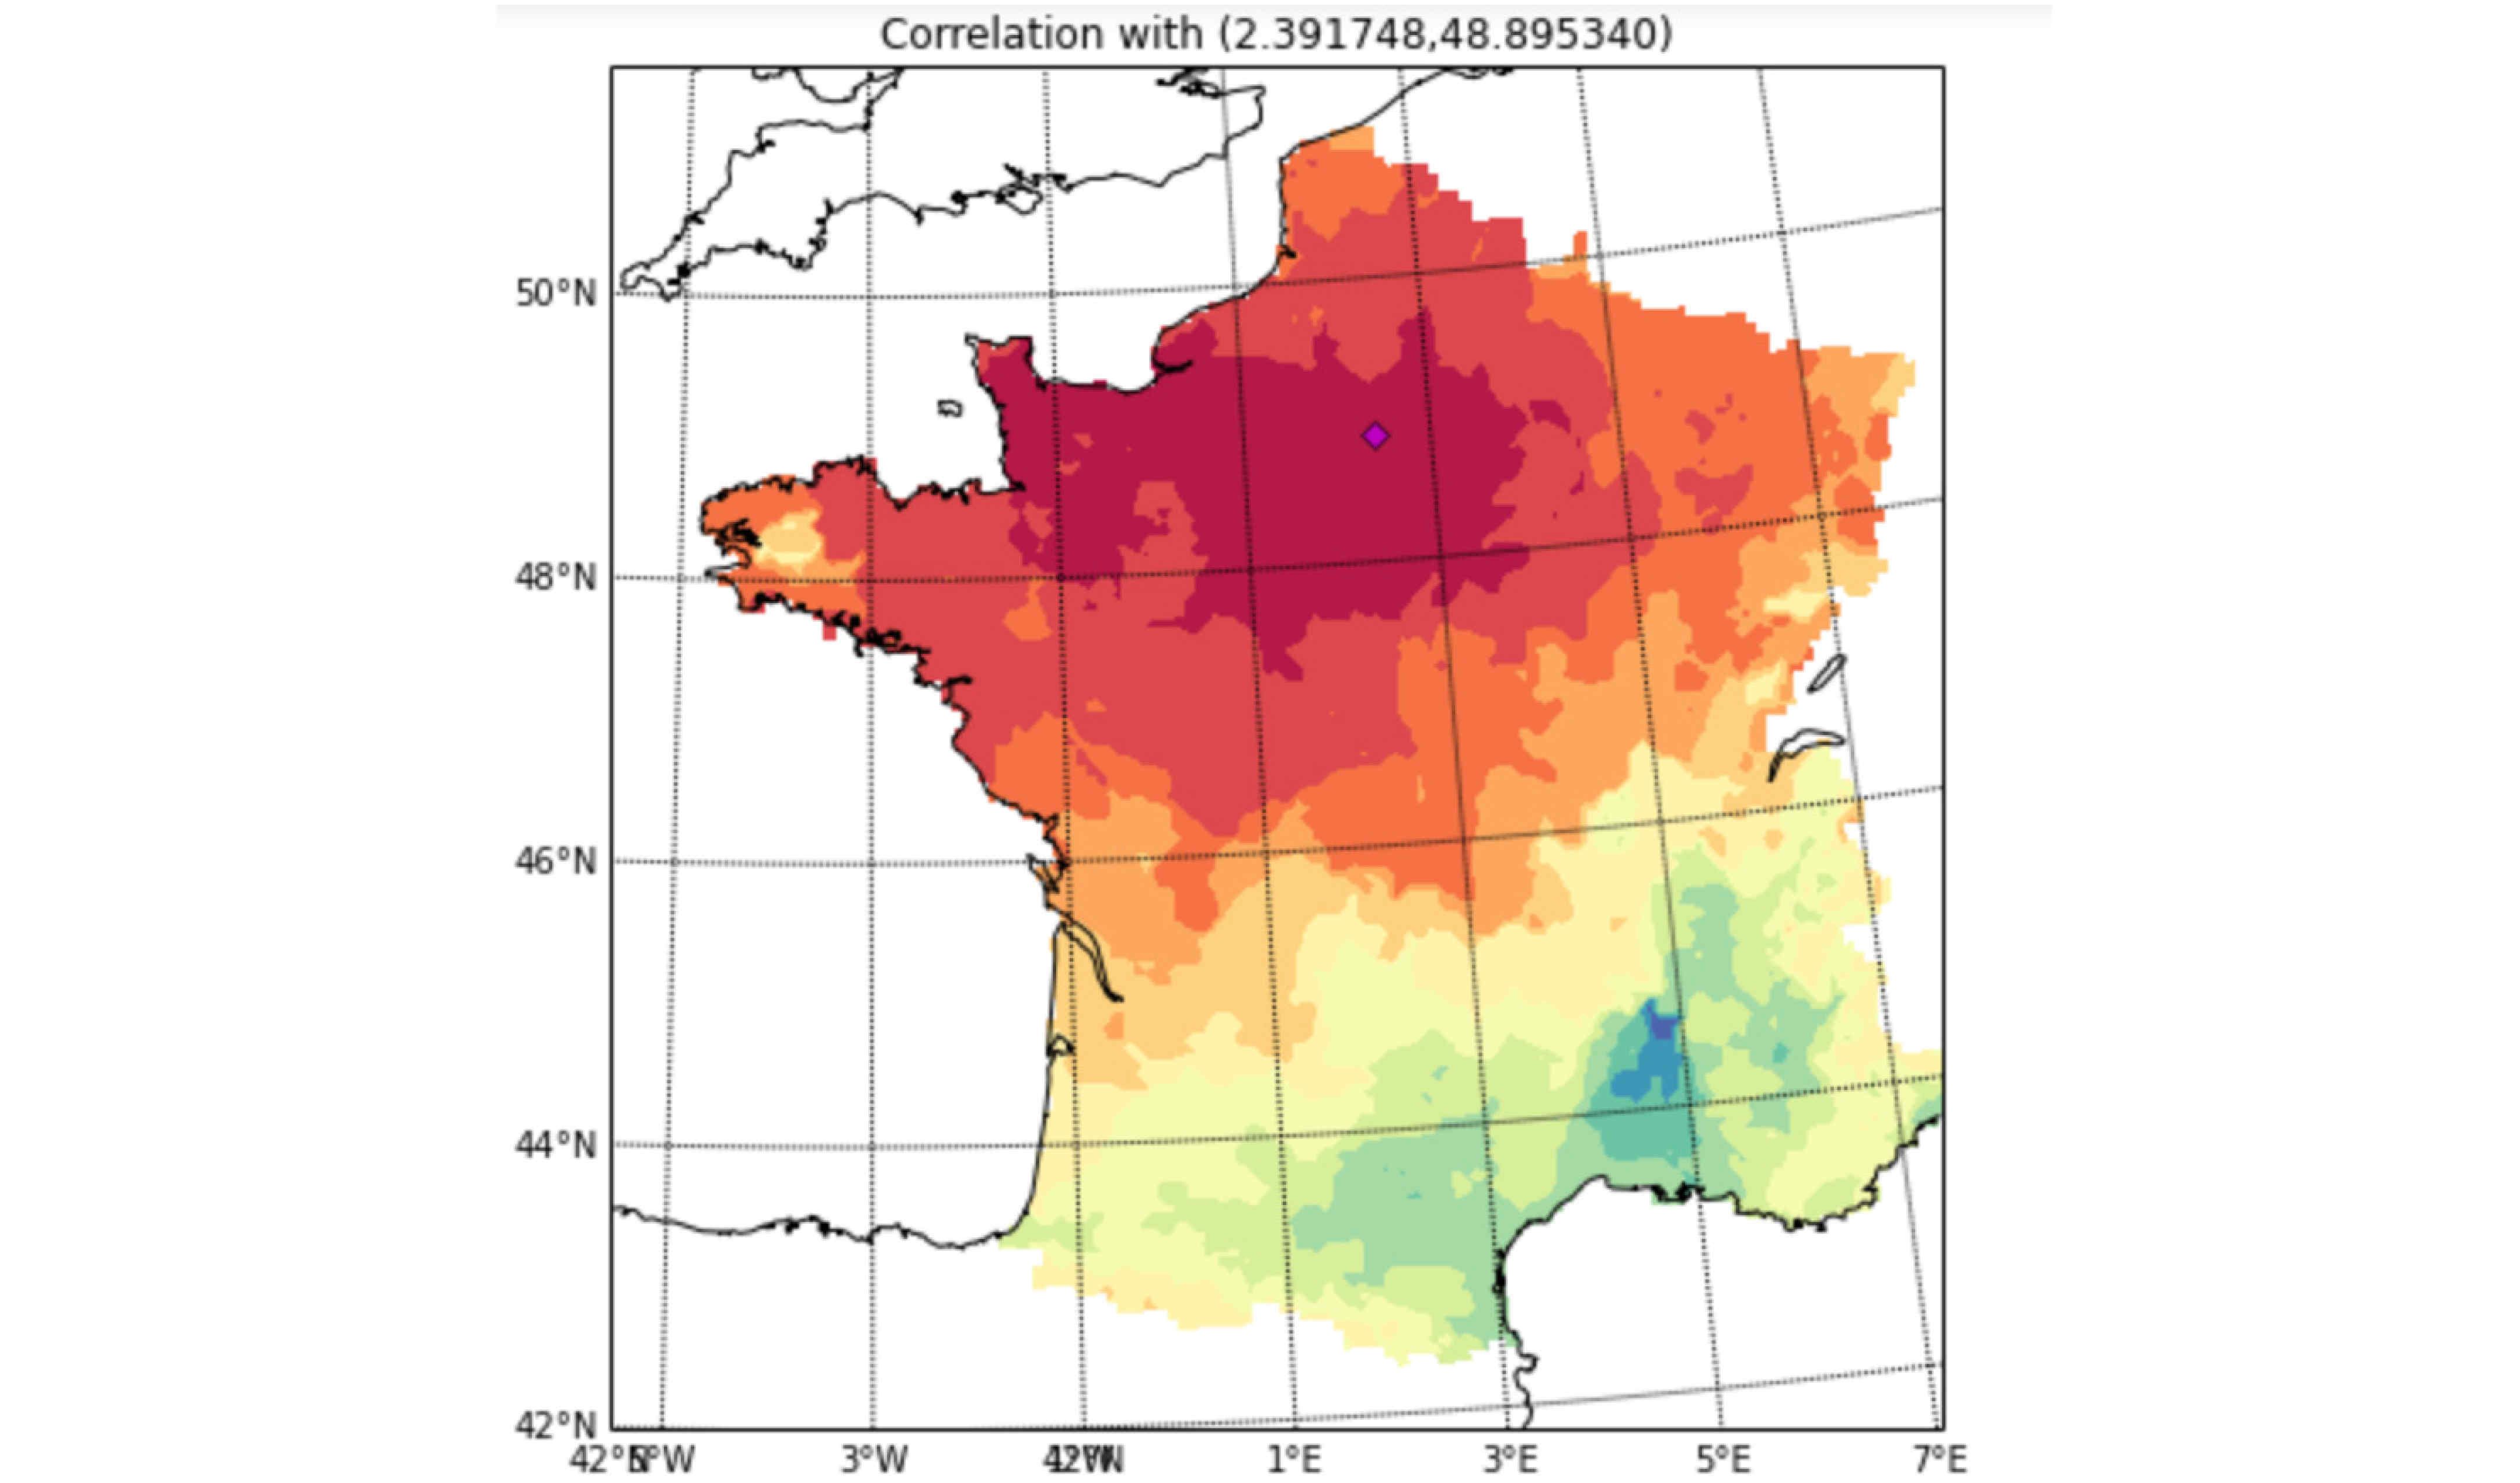 The graph shows the correlation between the wind speed observed in different parts of France and the wind speed observed in Paris 6 hours later. It illustrates the importance of precise multidimensional modelling of wind speed field for precise forecasting of wind power generation.